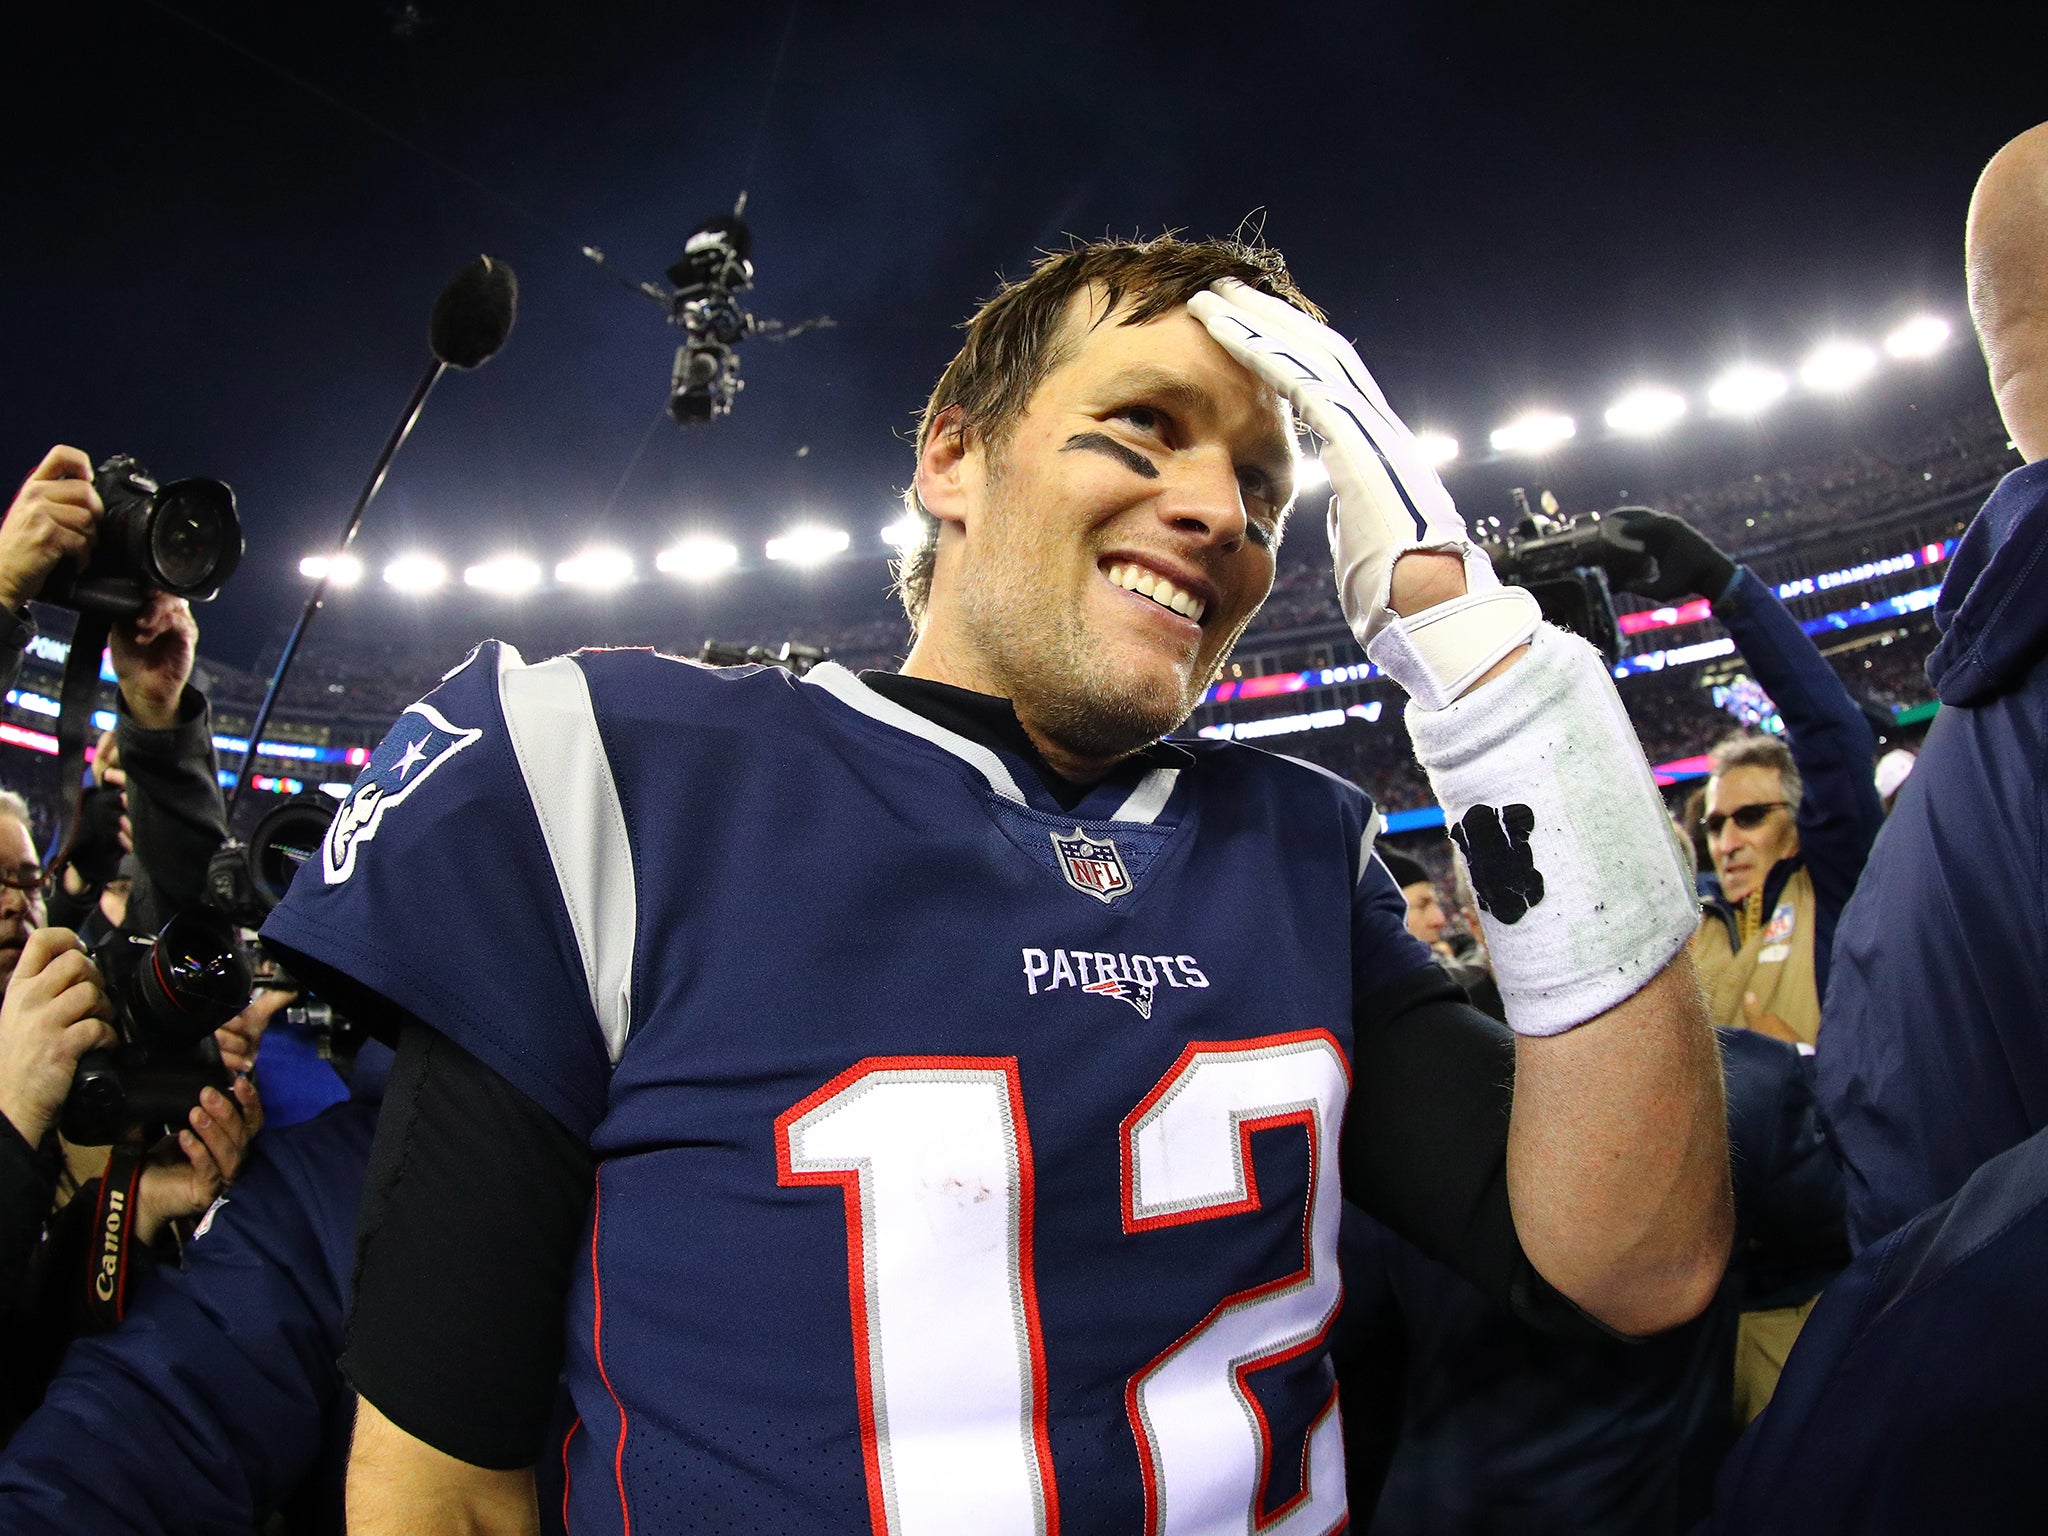 Tom Brady led the New England Patriots into a third Super Bowl in four years